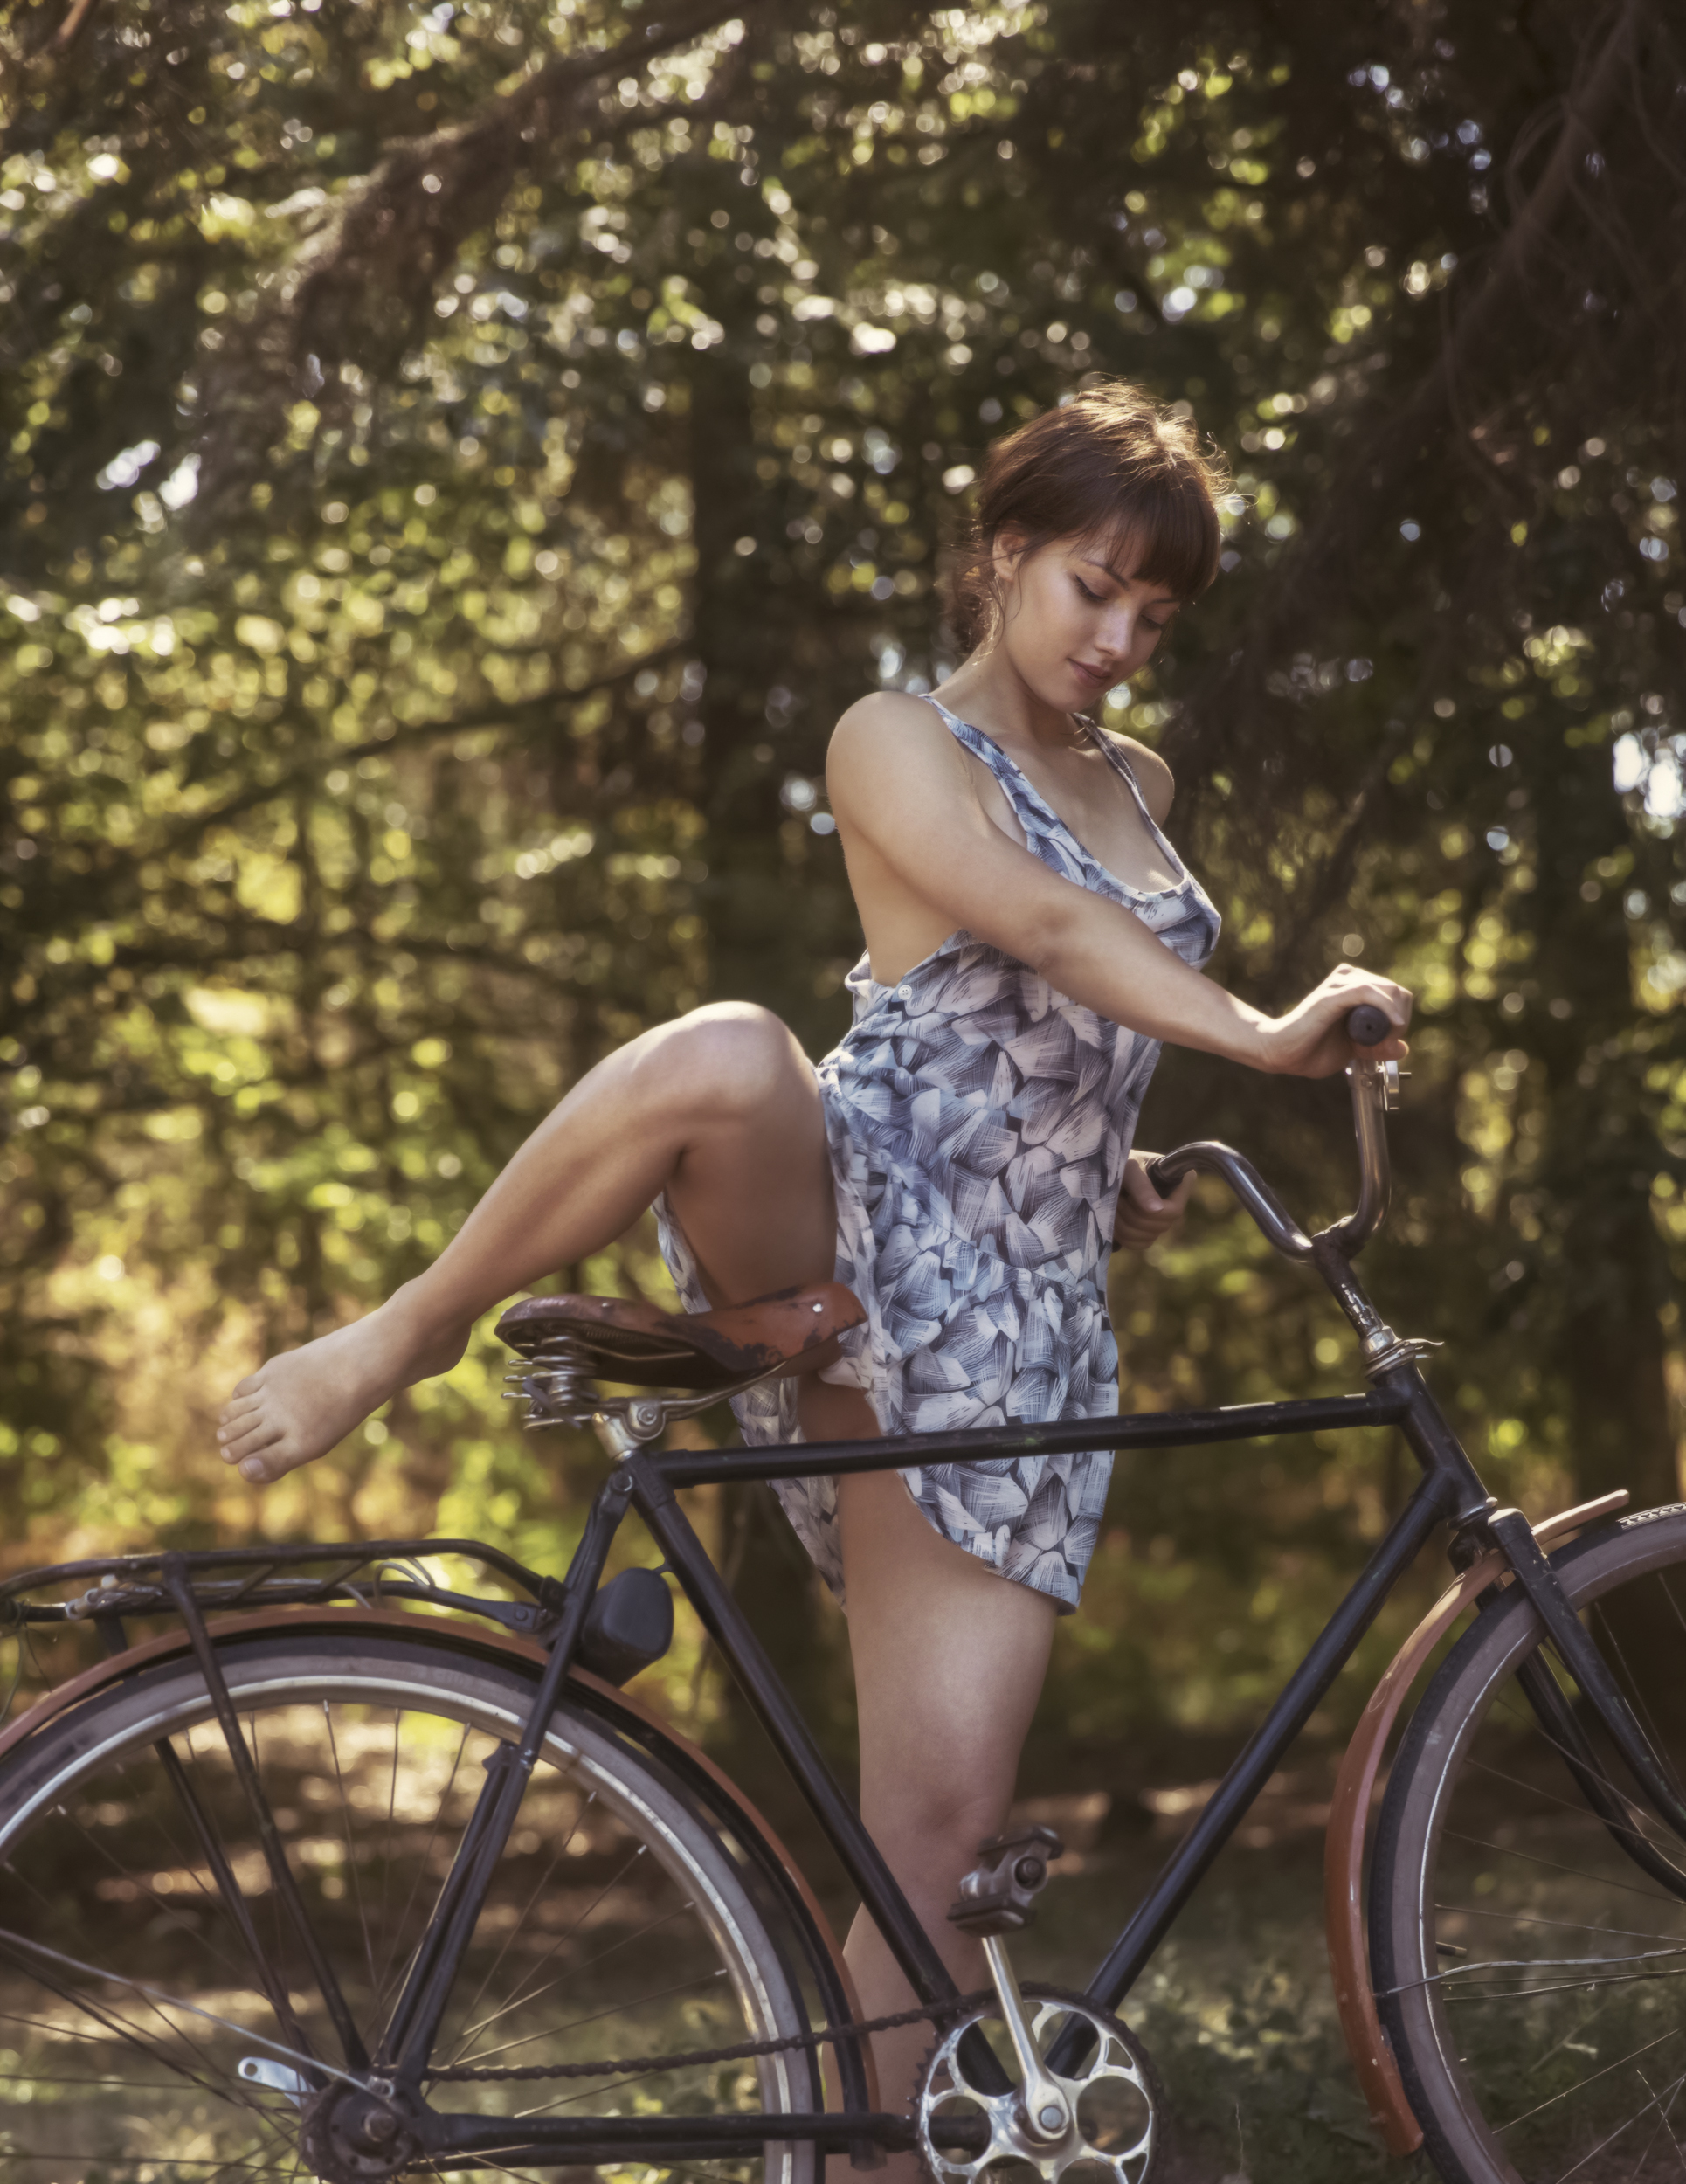 People 1930x2500 David Dubnitskiy women brunette short hair dress pattern lingerie panties barefoot bicycle trees smiling upskirt pointed toes spread legs women with bicycles